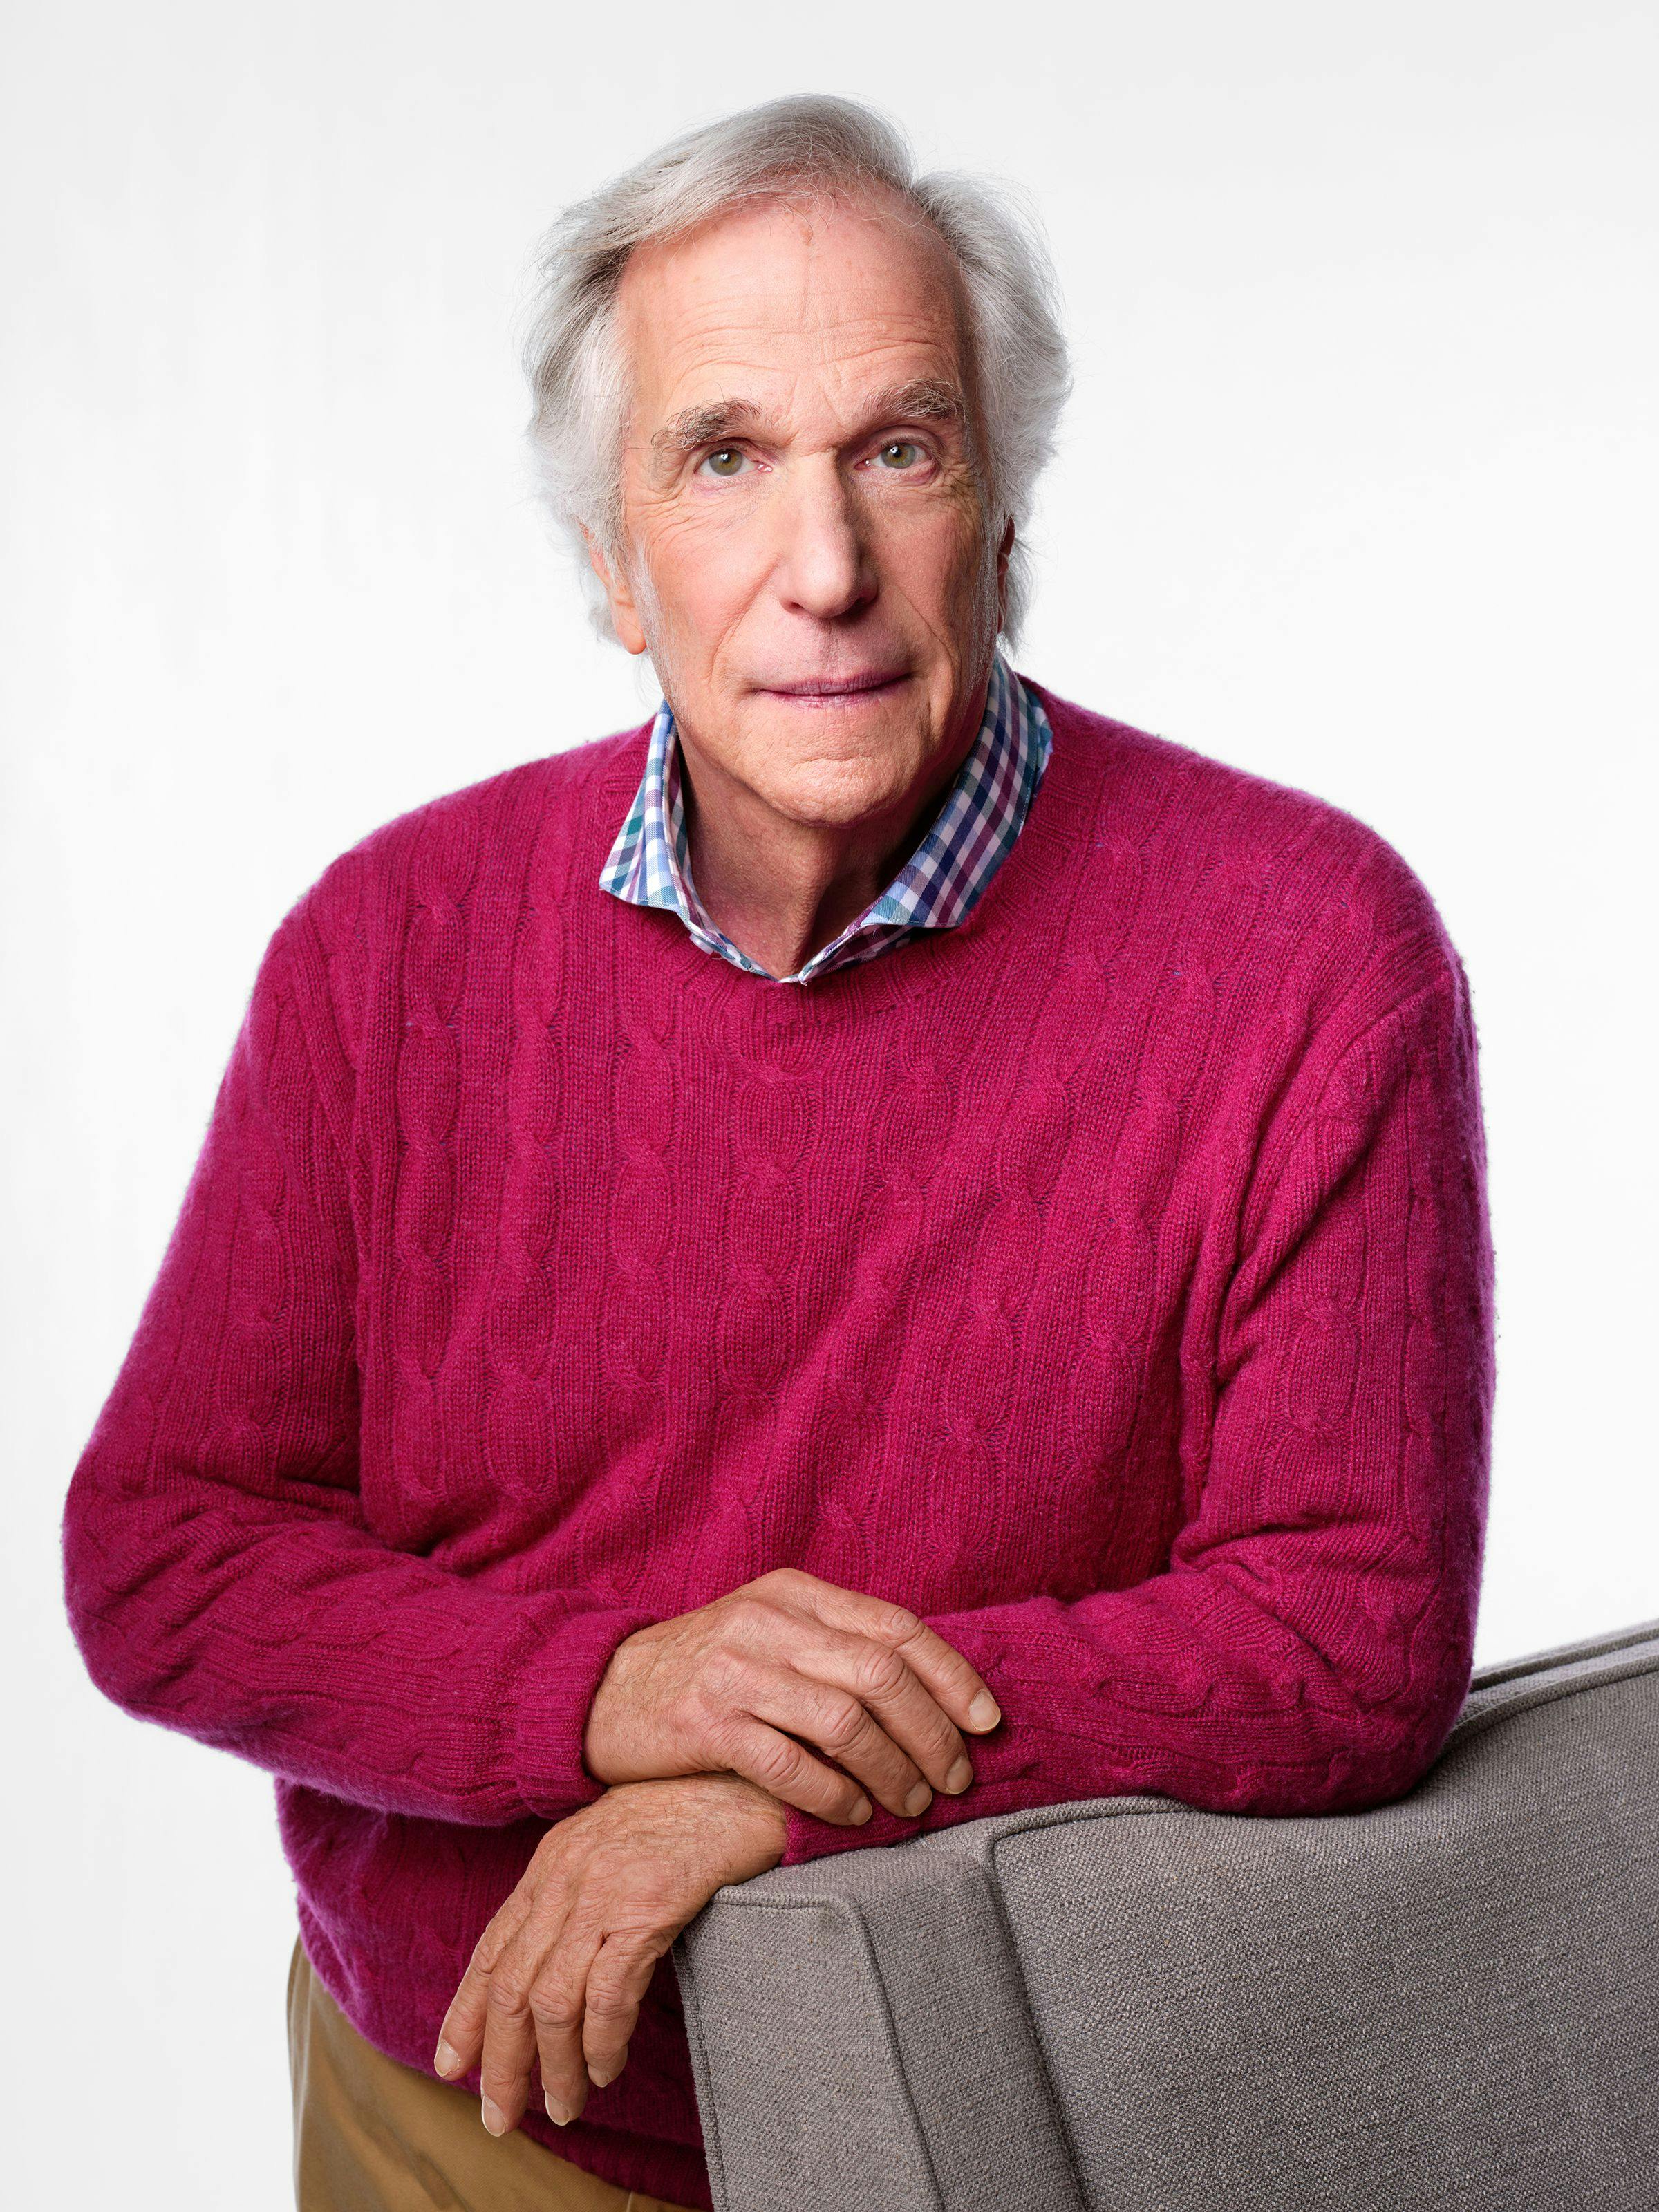 Actor Henry Winkler is parntering with Apellis to increase awareness of geographic atrophy. (Image courtesy of Apellis Pharmaceuticals Inc.)